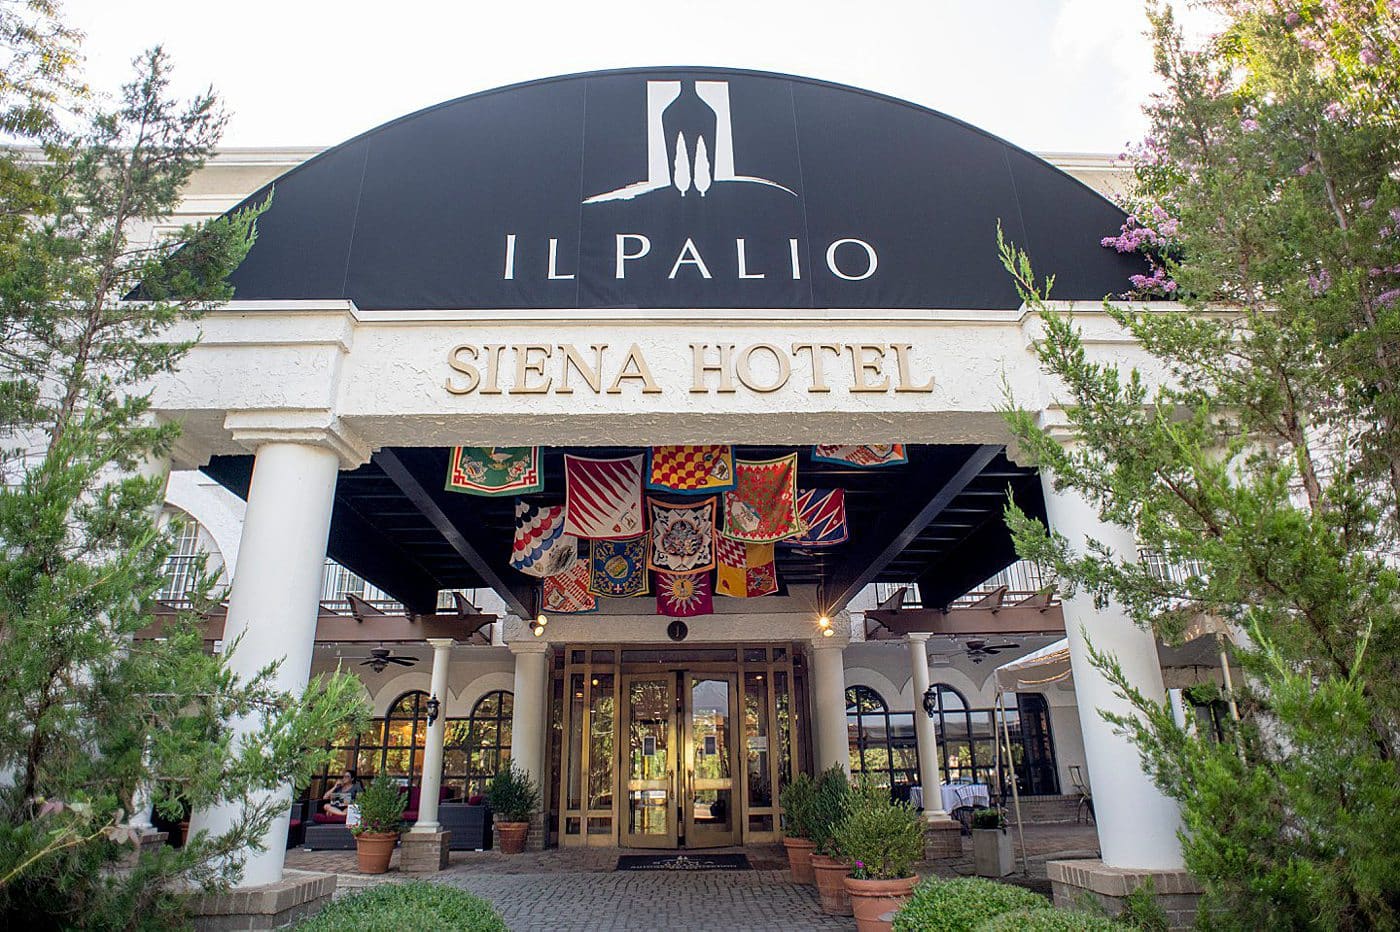 The Siena Hotel in Chapel Hill and Il Palio Restaurant: an Italy-Inspired Experience